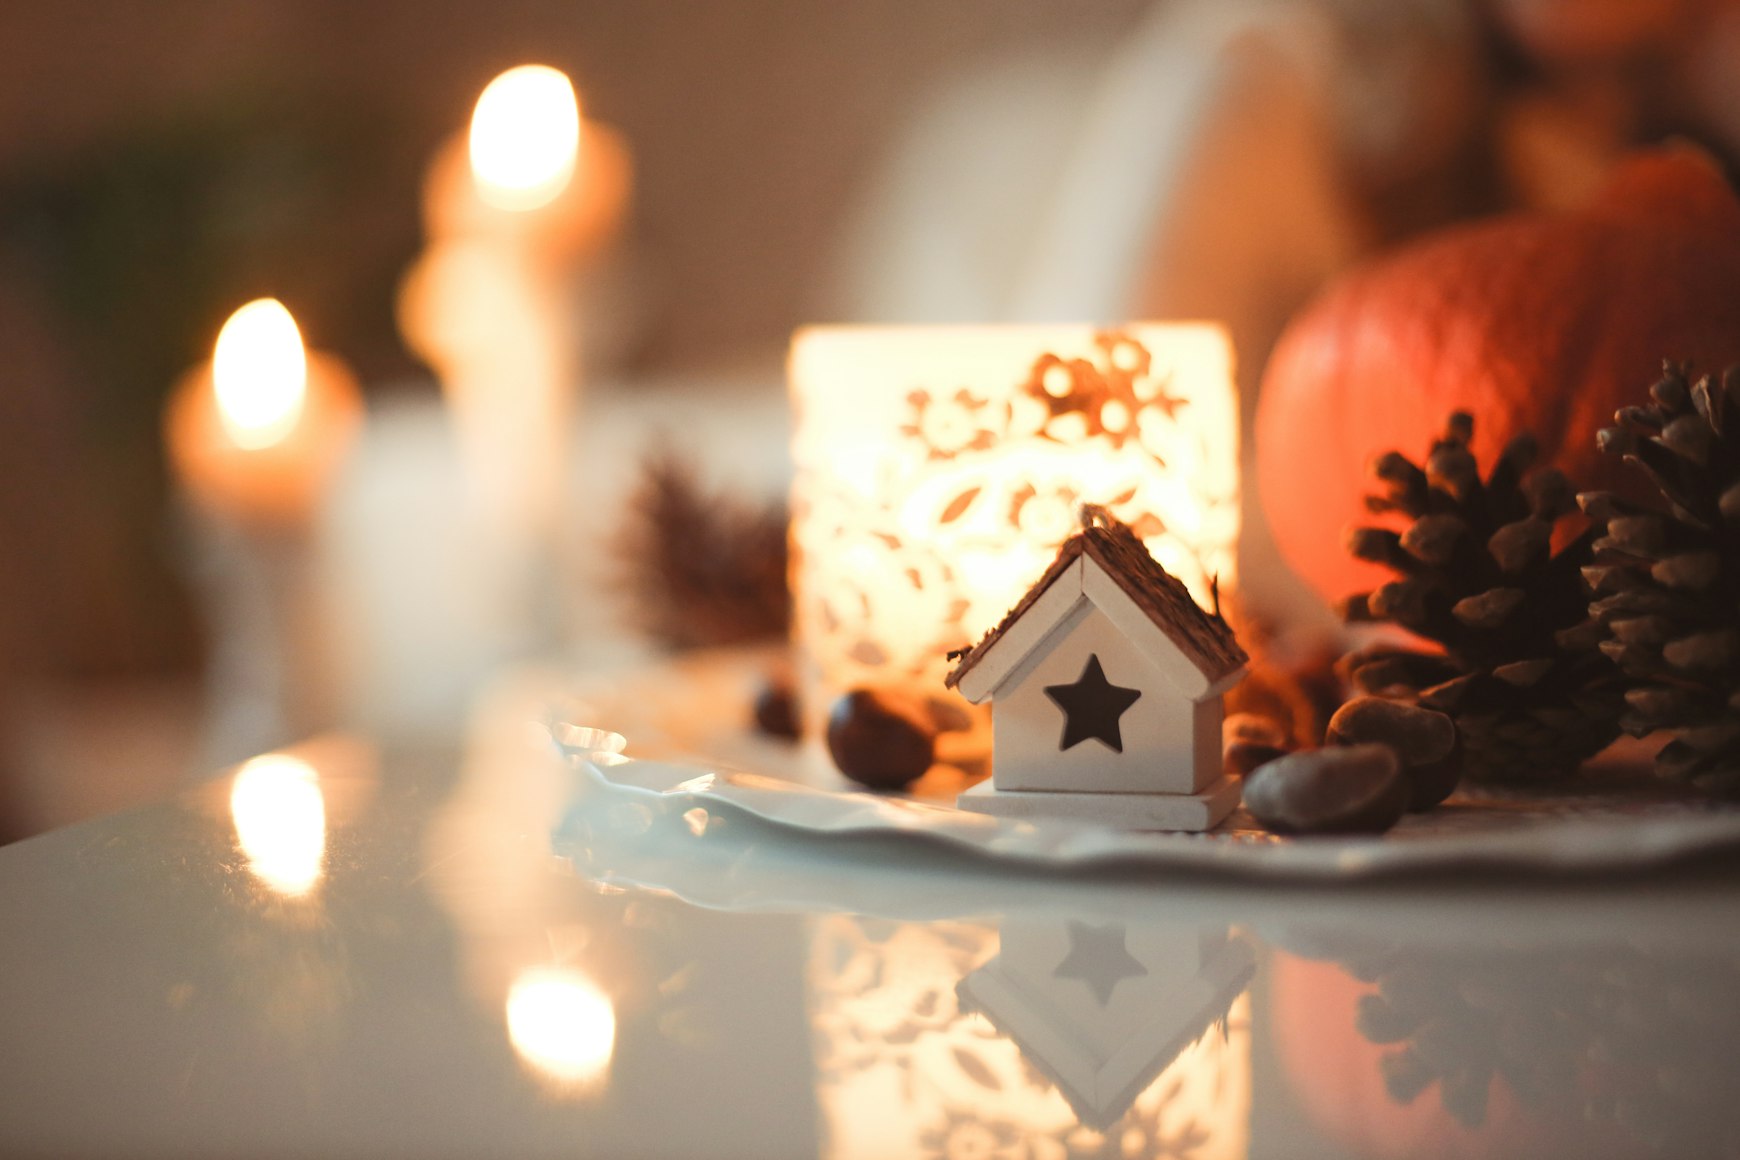 Holiday decoration of a small house next to a candle.